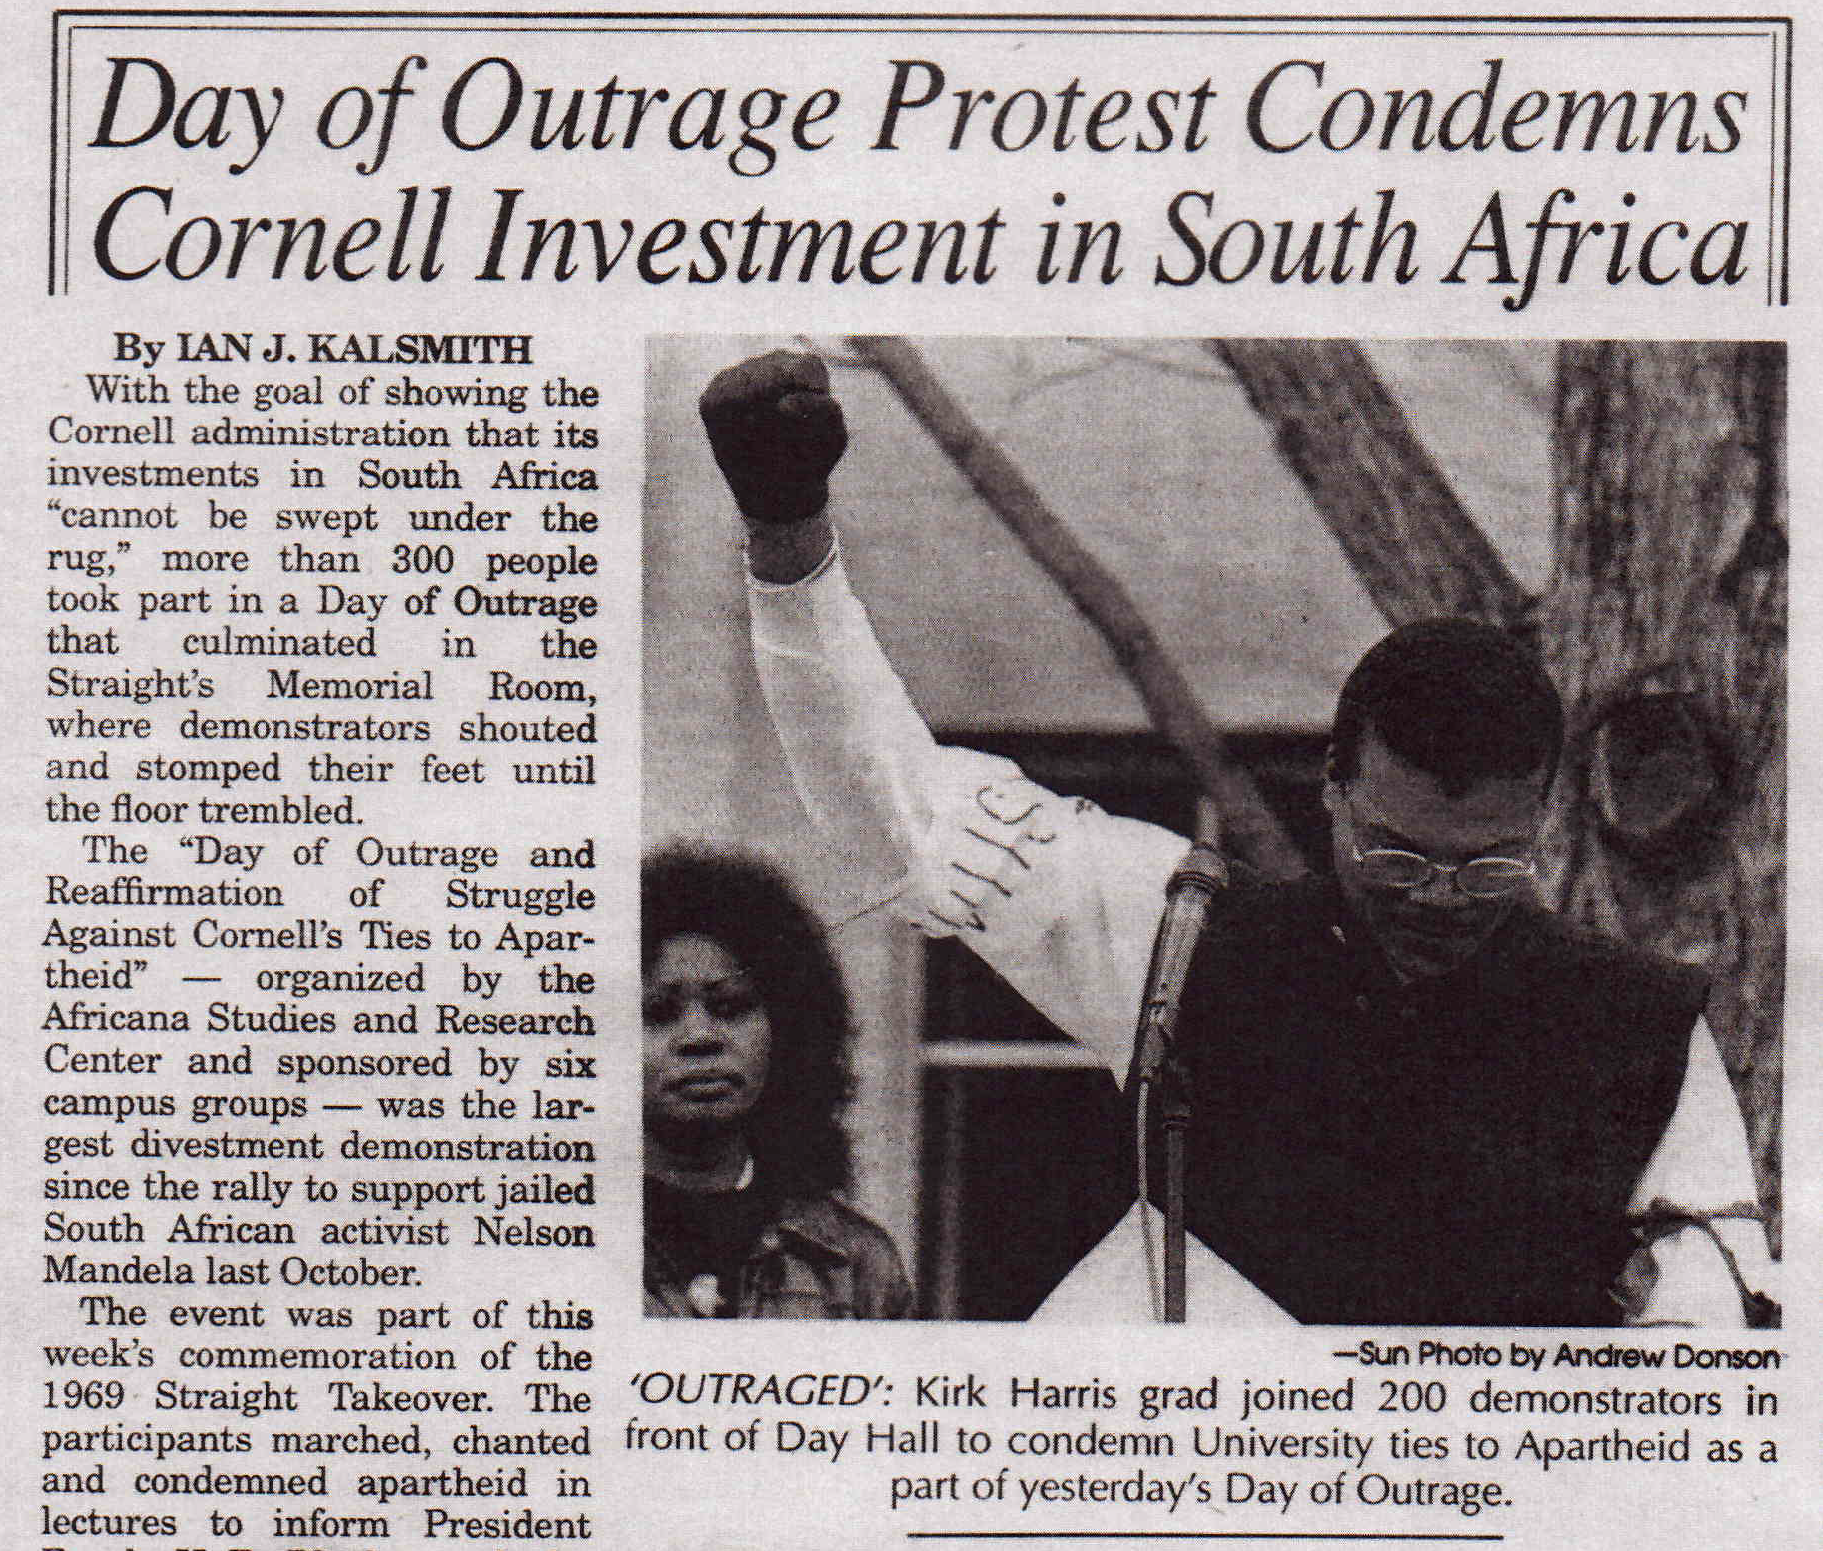 Newspaper clipping shows Kirk Harris at a protest in 1989.